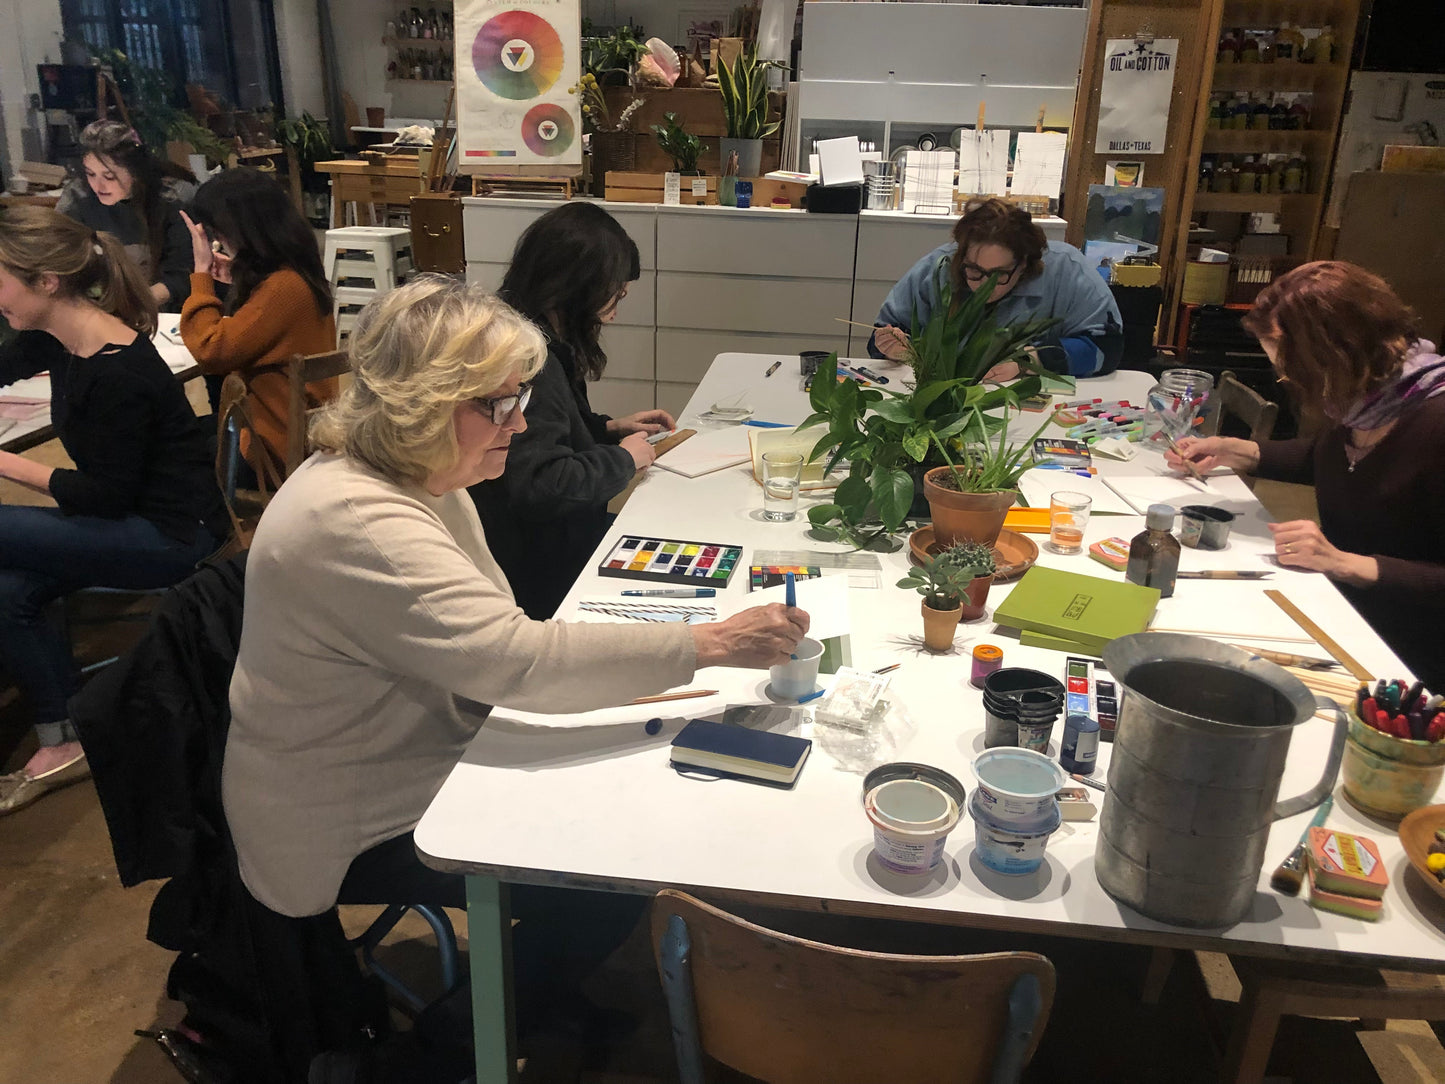 SUMMER Semester Adult Weekly Drawing Class